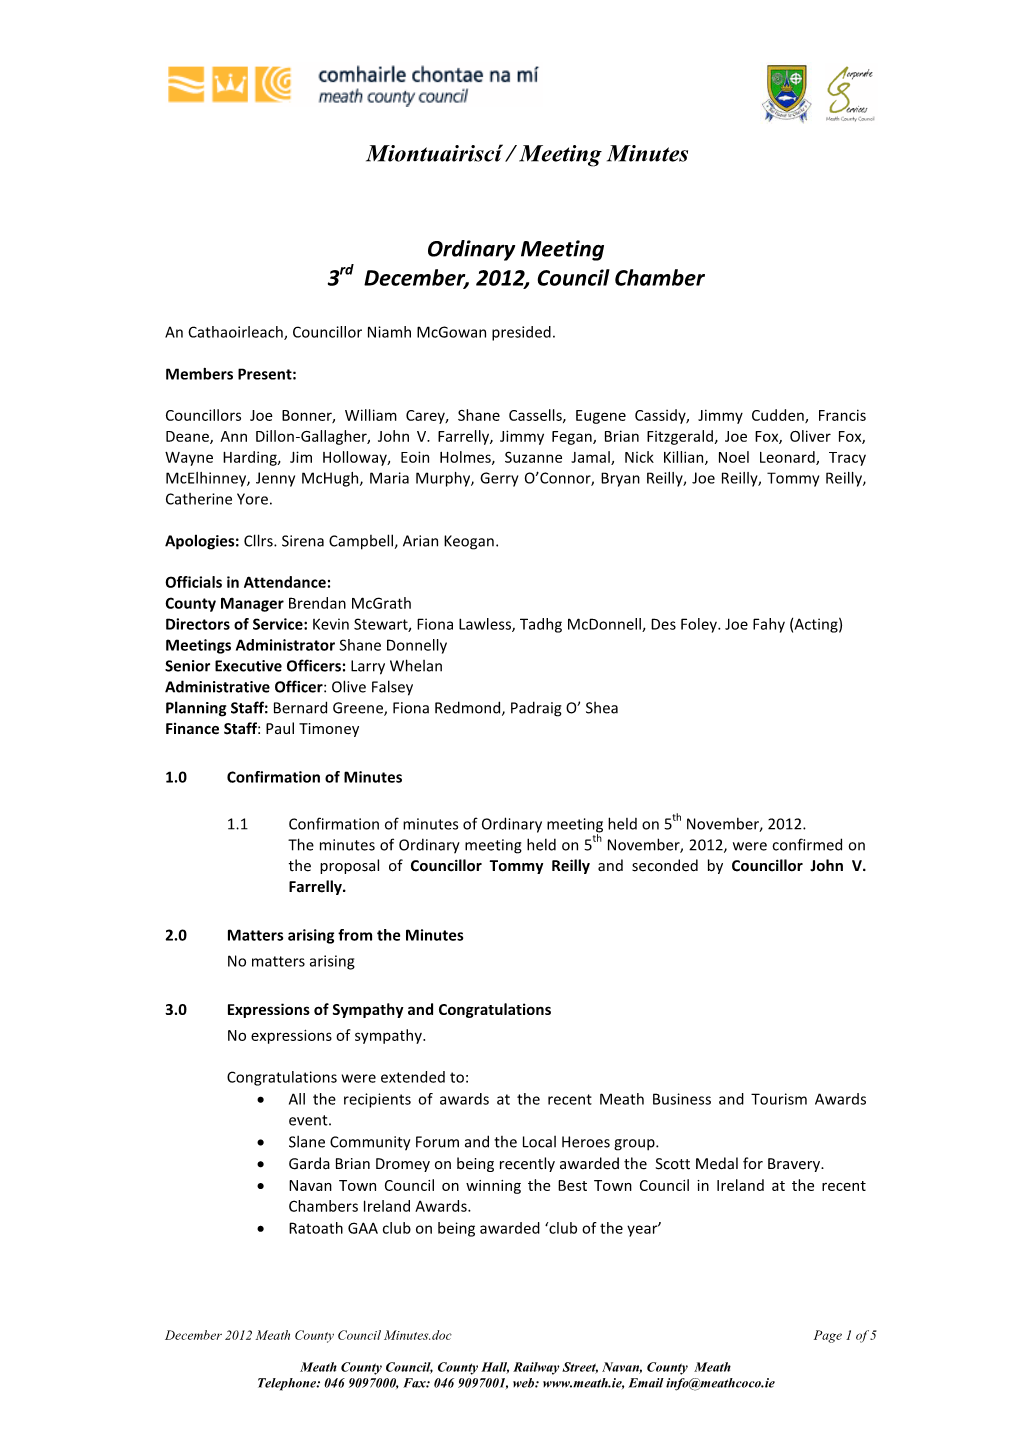 December 2012 Meath County Council Minutes.Pdf